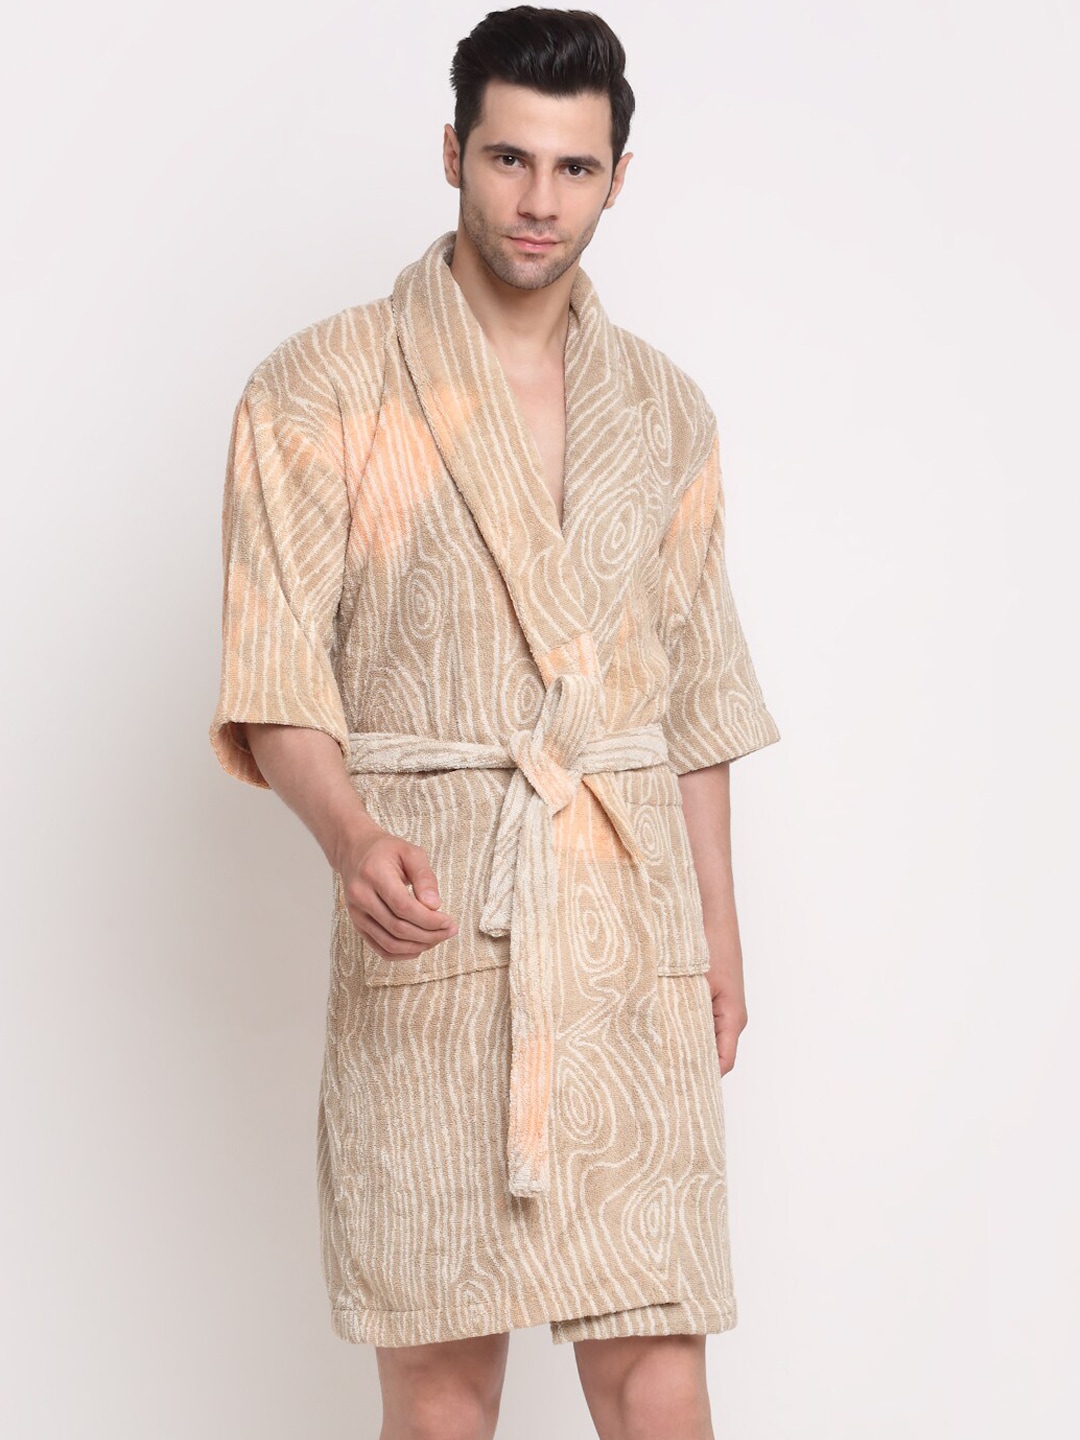 Trident Peach-Coloured & Grey Printed Bath Robe With Belt Price in India